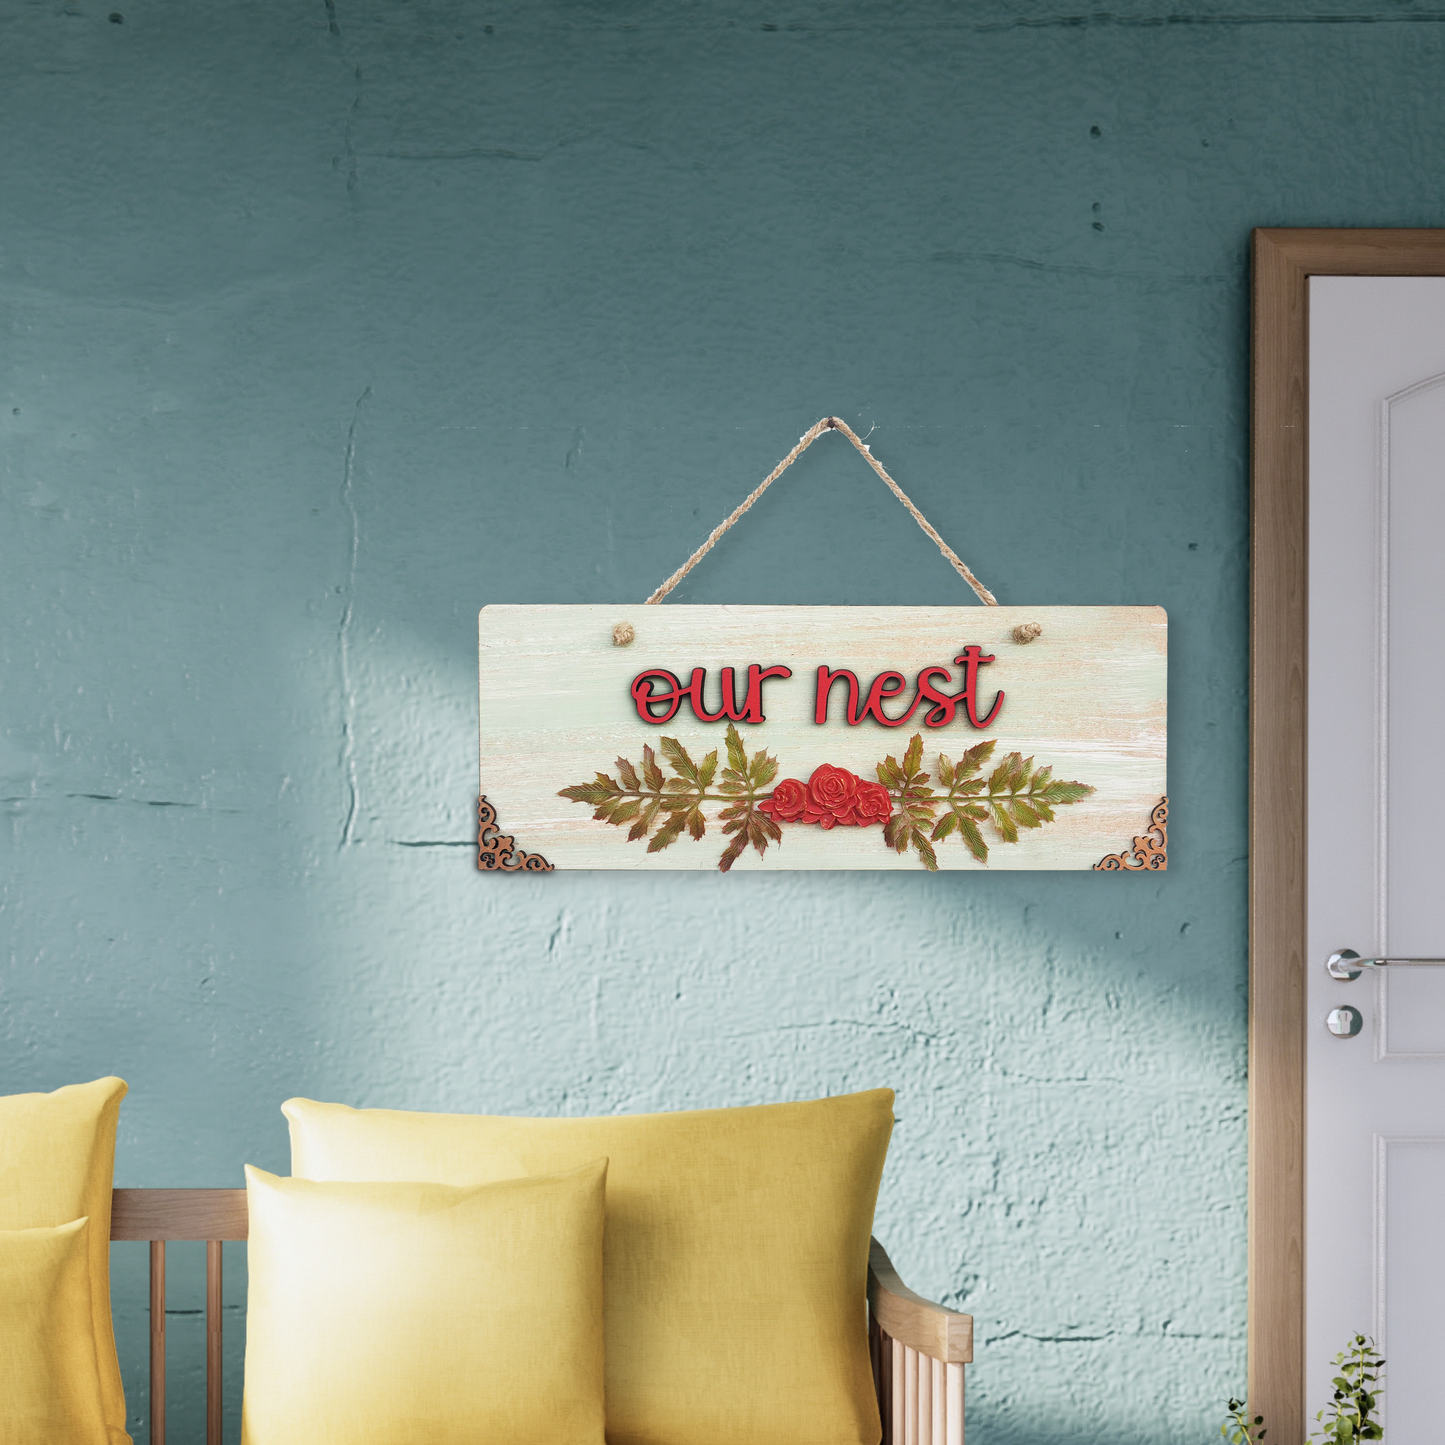 Our Nest Quote Rustic Vintage Wooden Door or Wall Hanging